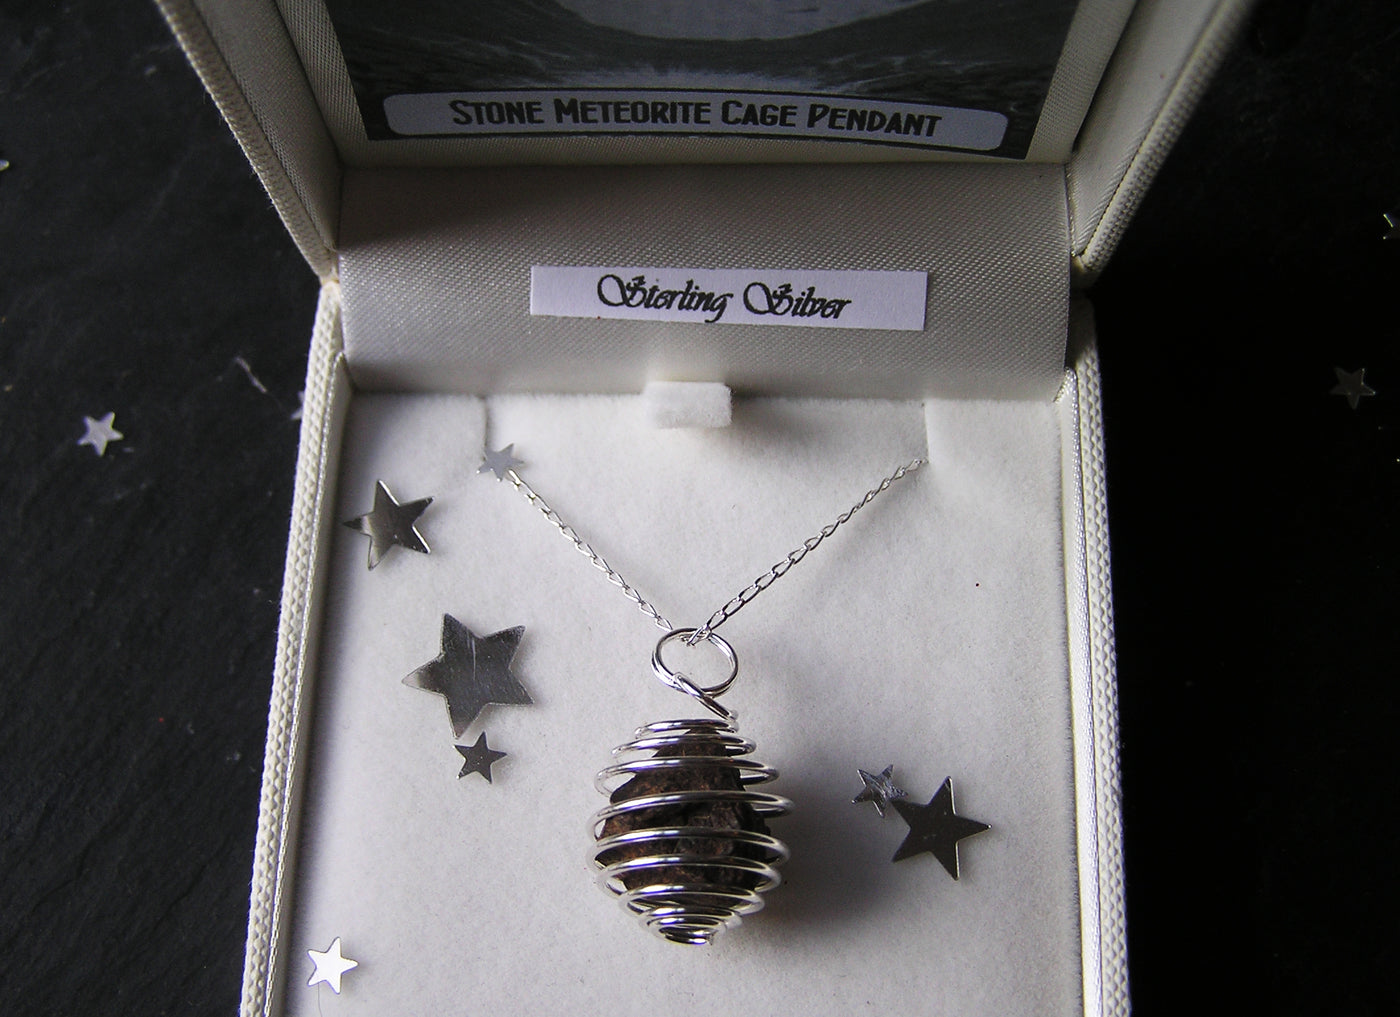 necklace with meteorite stone